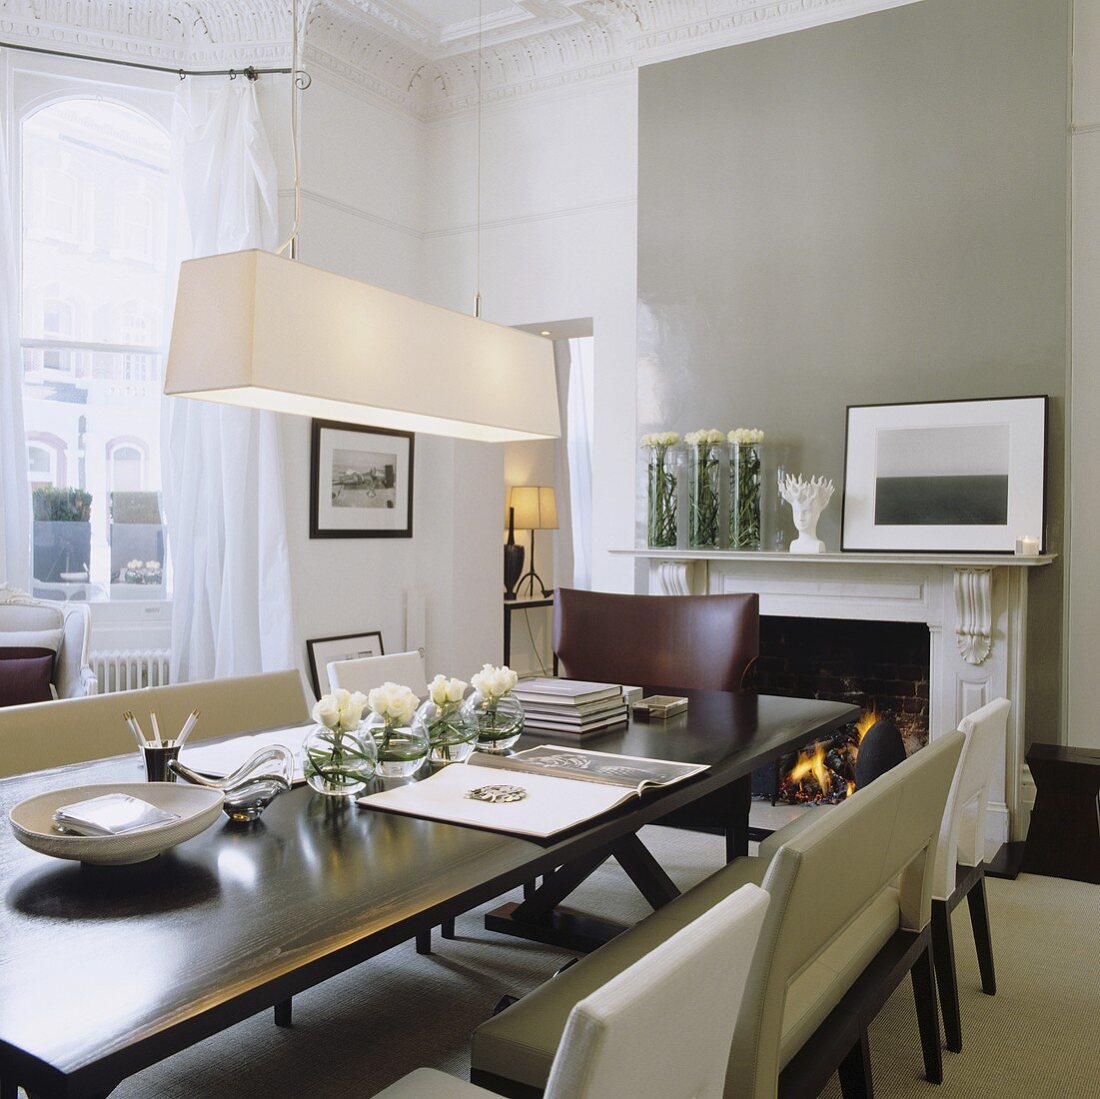 An Art Deco dining area with a pendant lamp with a white shade in front of a grey-painted wall with a fireplace